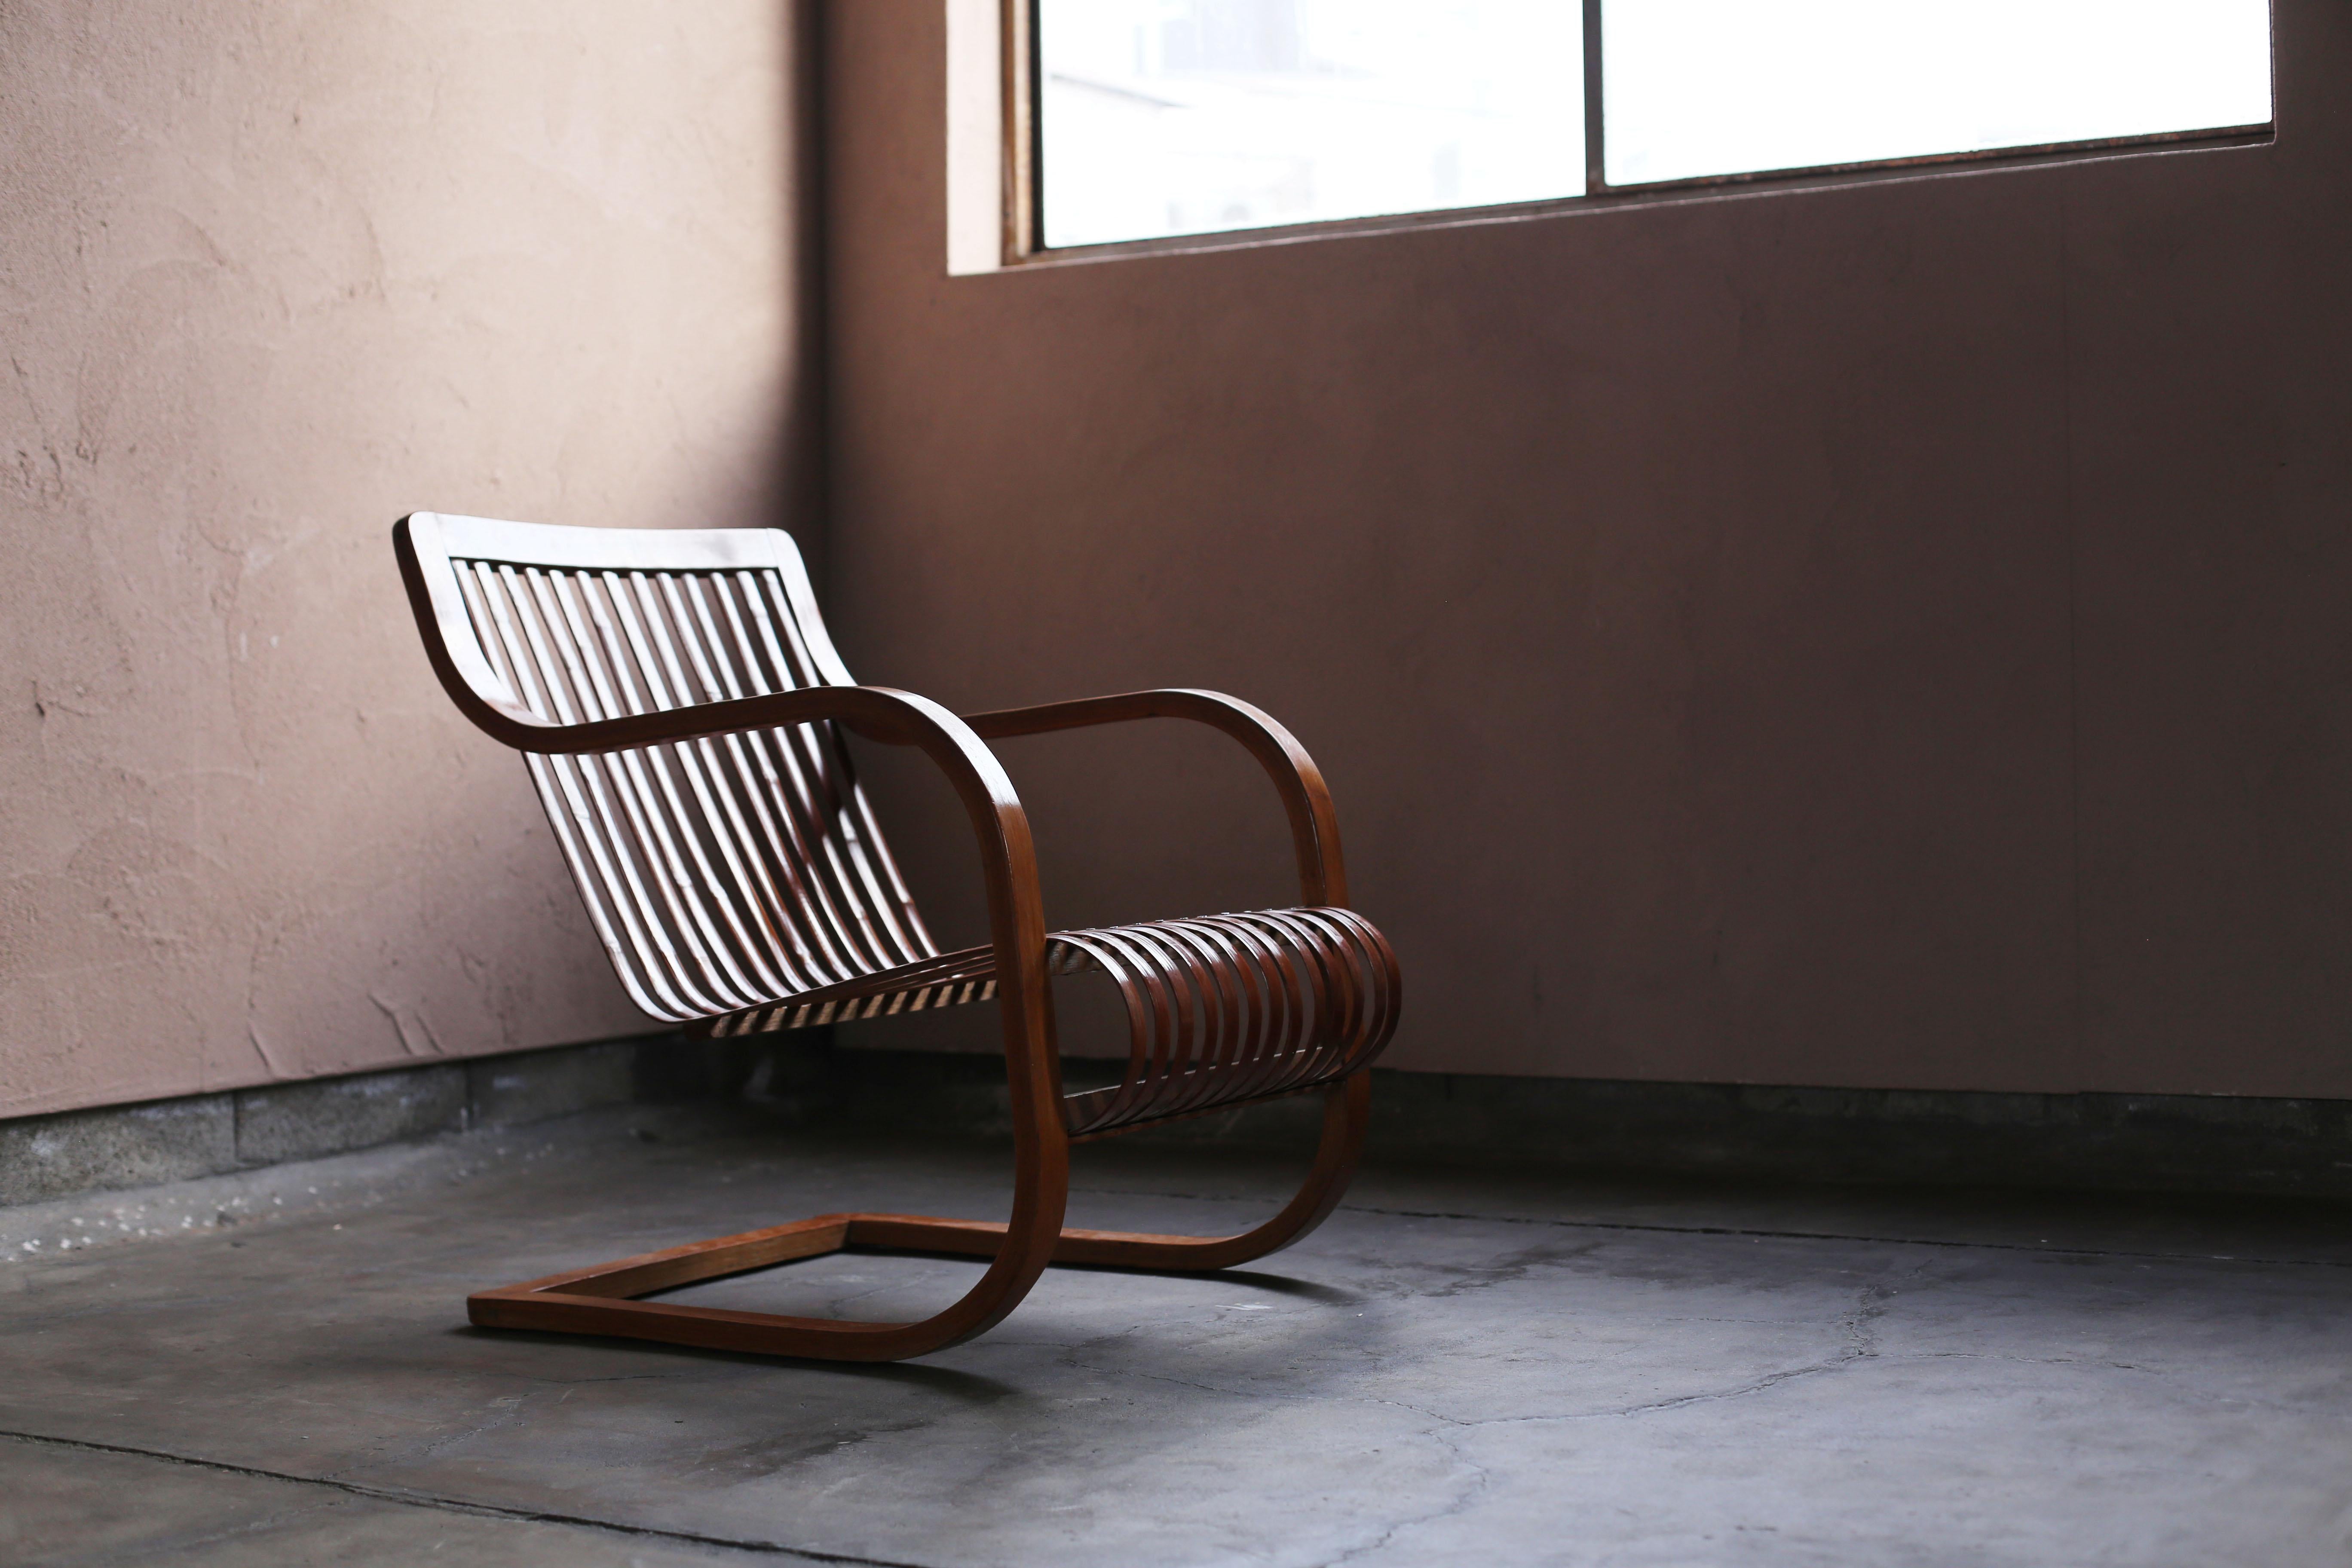 This is a bamboo chair designed by Ubunji Kidokoro, who was enrolled in Mitsukoshi Furniture Design Office in 1937.

In 1937, Ubunji Kidokoro was enrolled in the Mitsukoshi Furniture Design Office. Inspired by the design of Alvar Aalto's Model 31